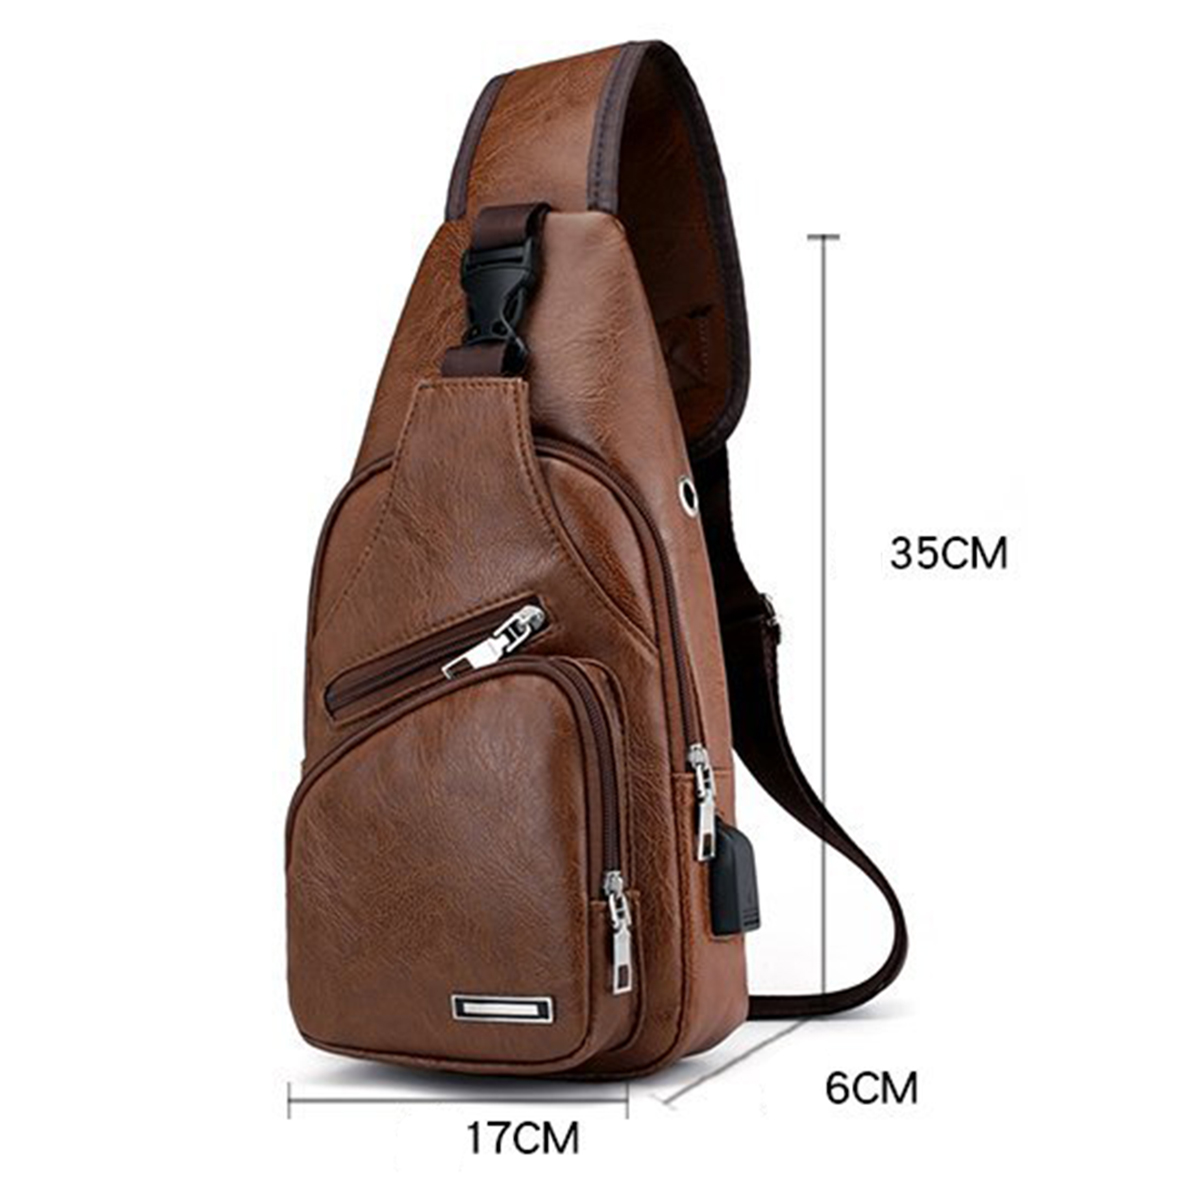 Casual-Outdoor-Travel-USB-Charging-Port-Sling-Bag-Leather-Chest-Bag-Crossbody-Bag-1637756-7